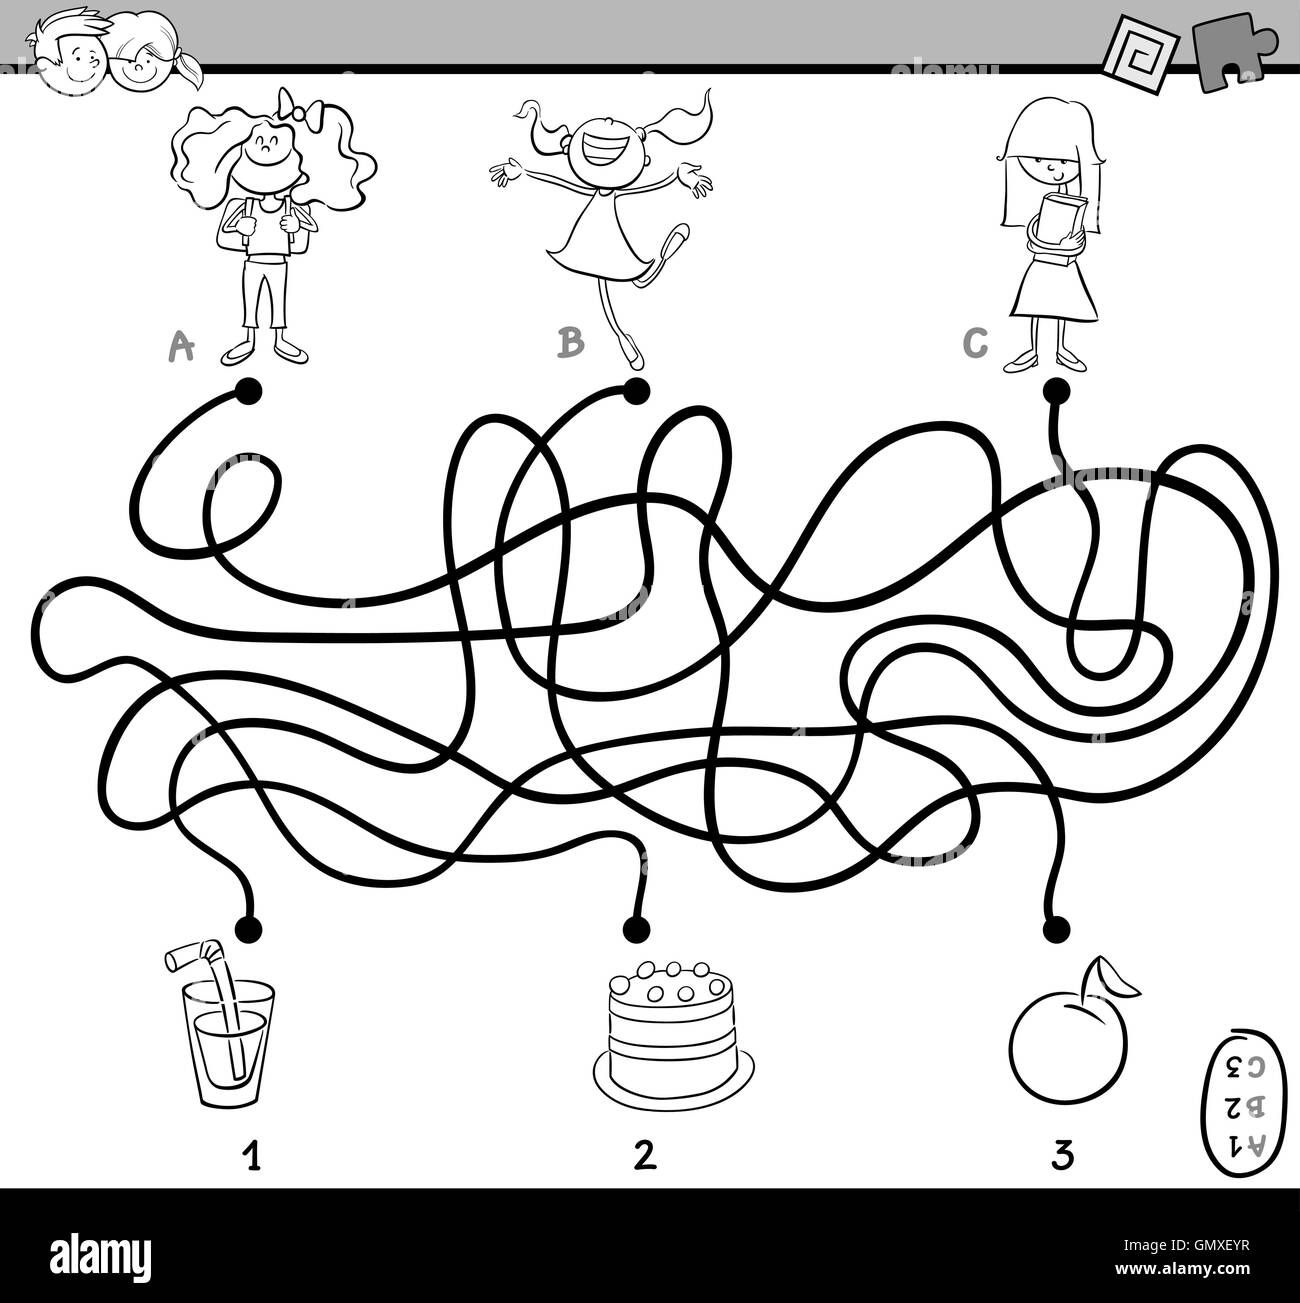 Black and White Cartoon Illustration of Educational Paths or Maze Puzzle Activity with Children and Food Objects Coloring Book Stock Vector